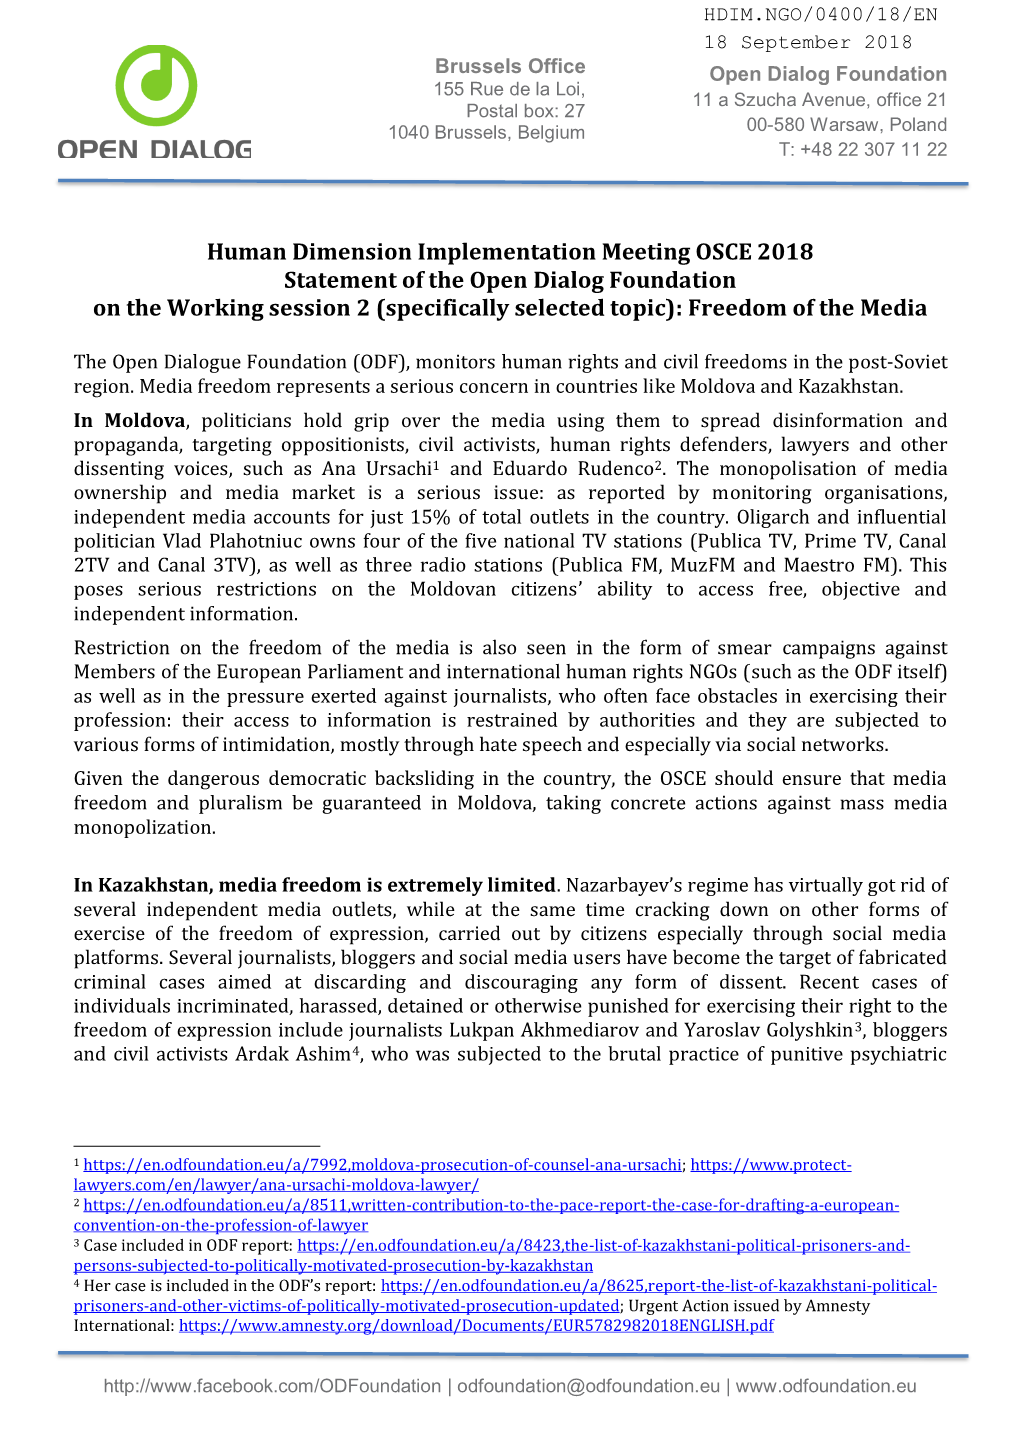 Human Dimension Implementation Meeting OSCE 2018 Statement of the Open Dialog Foundation on the Working Session 2 (Specifically Selected Topic): Freedom of the Media